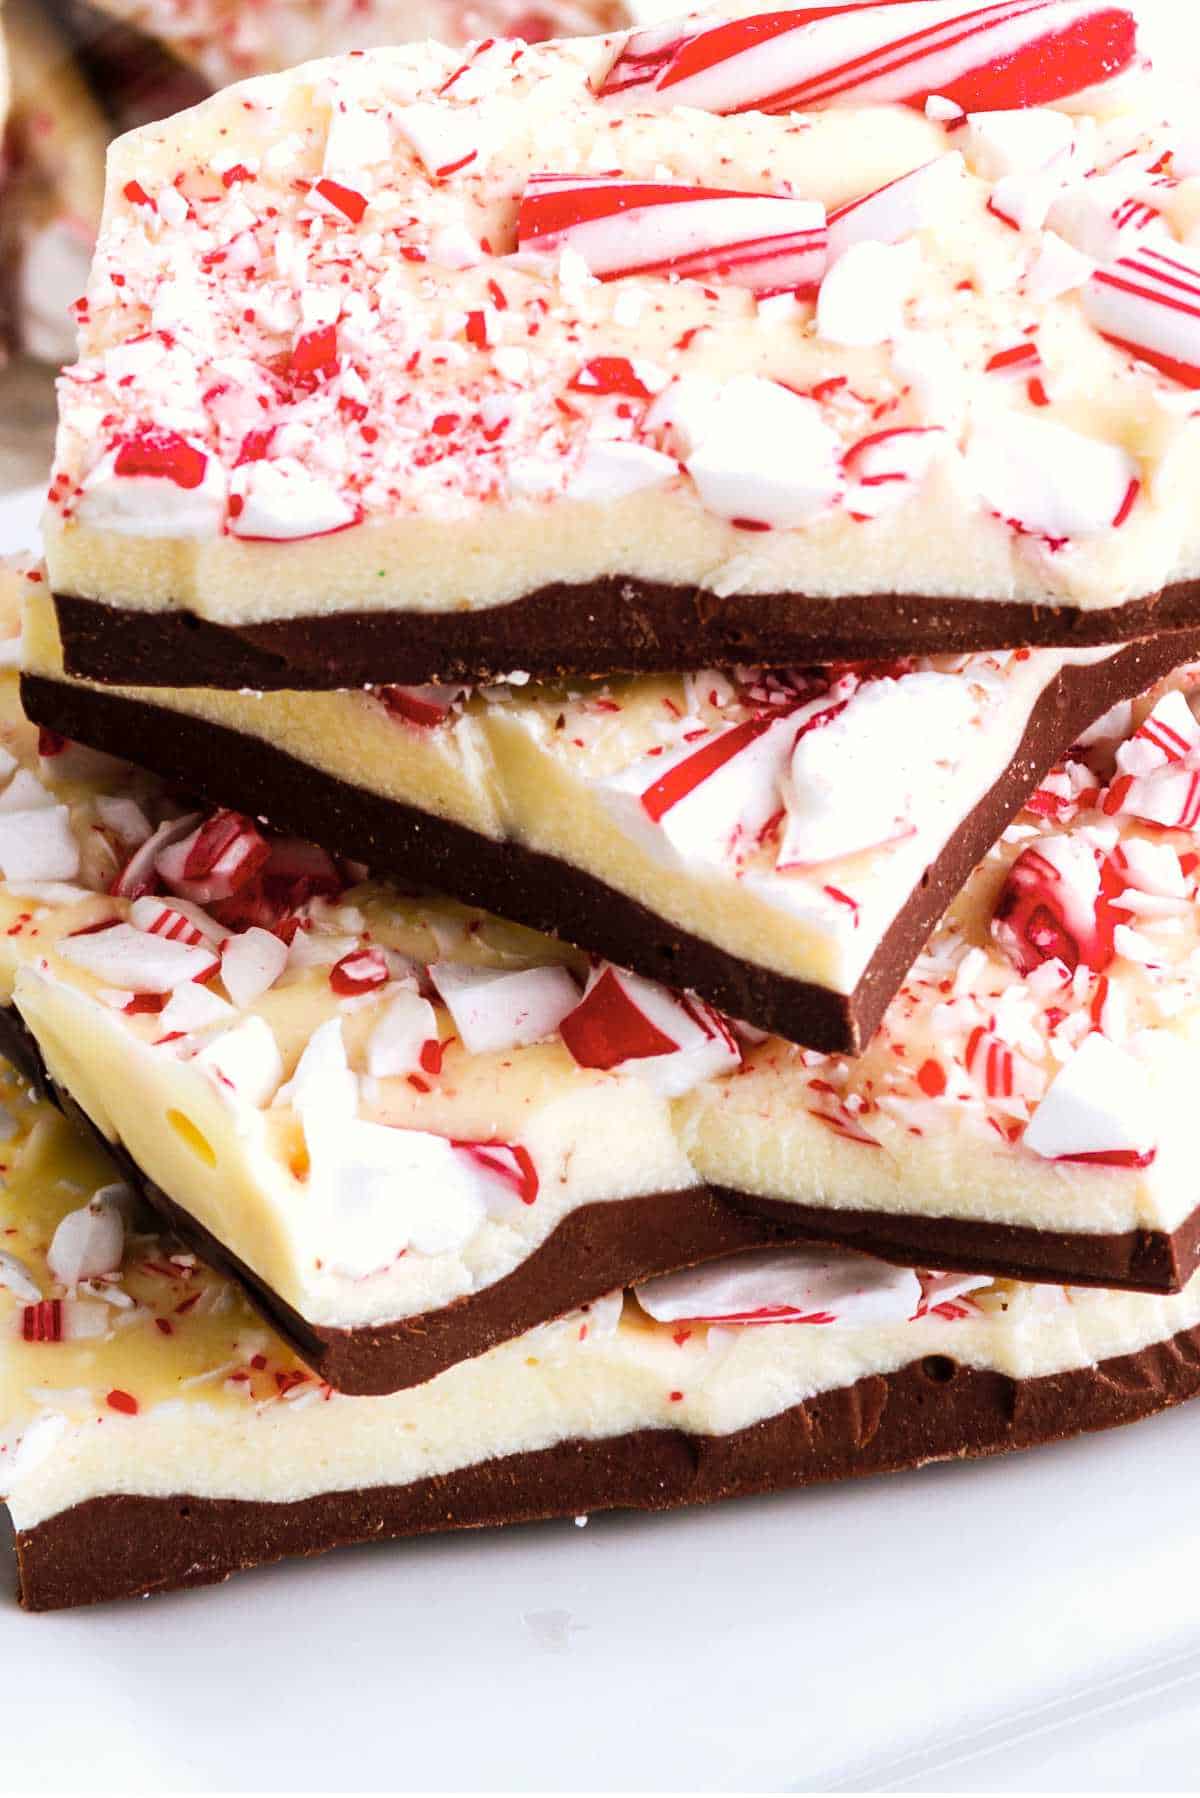 Holiday gift packages filled with chocolate peppermint bark candy.